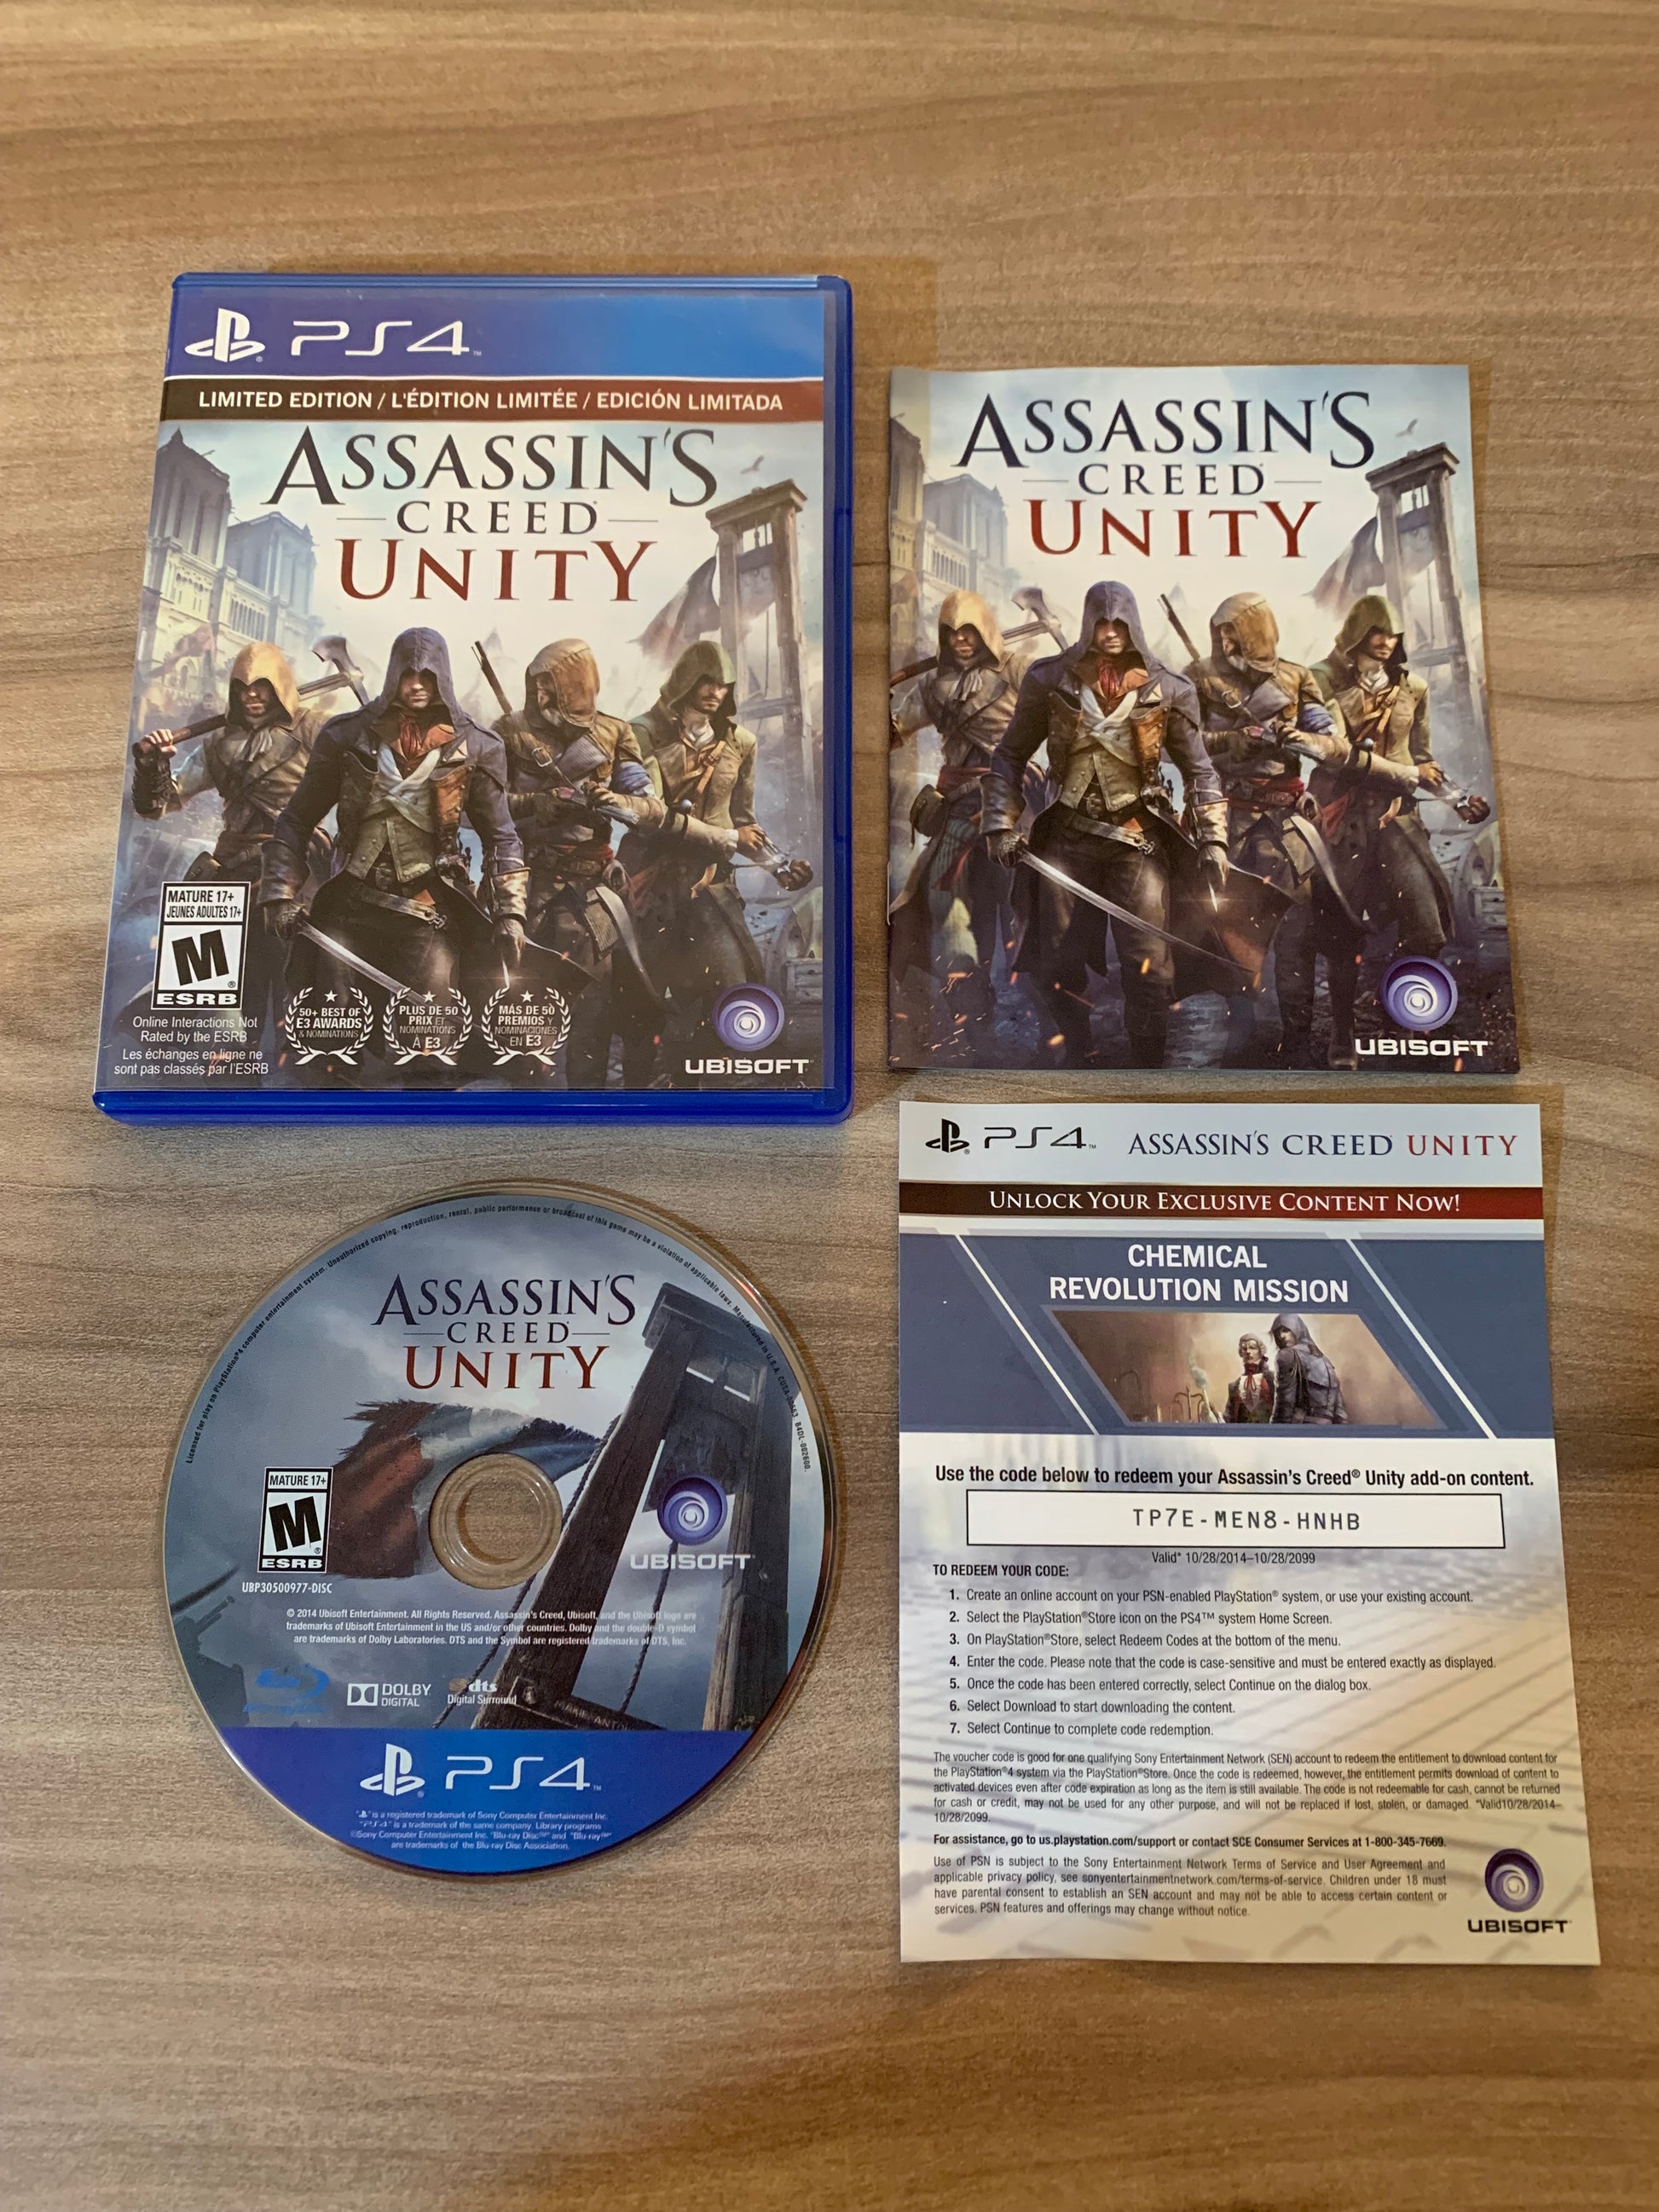 PiXEL-RETRO.COM : SONY PLAYSTATION 4 (PS4) COMPLETE CIB BOX MANUAL GAME NTSC ASSASSIN'S CREED UNITY LIMITED EDITION